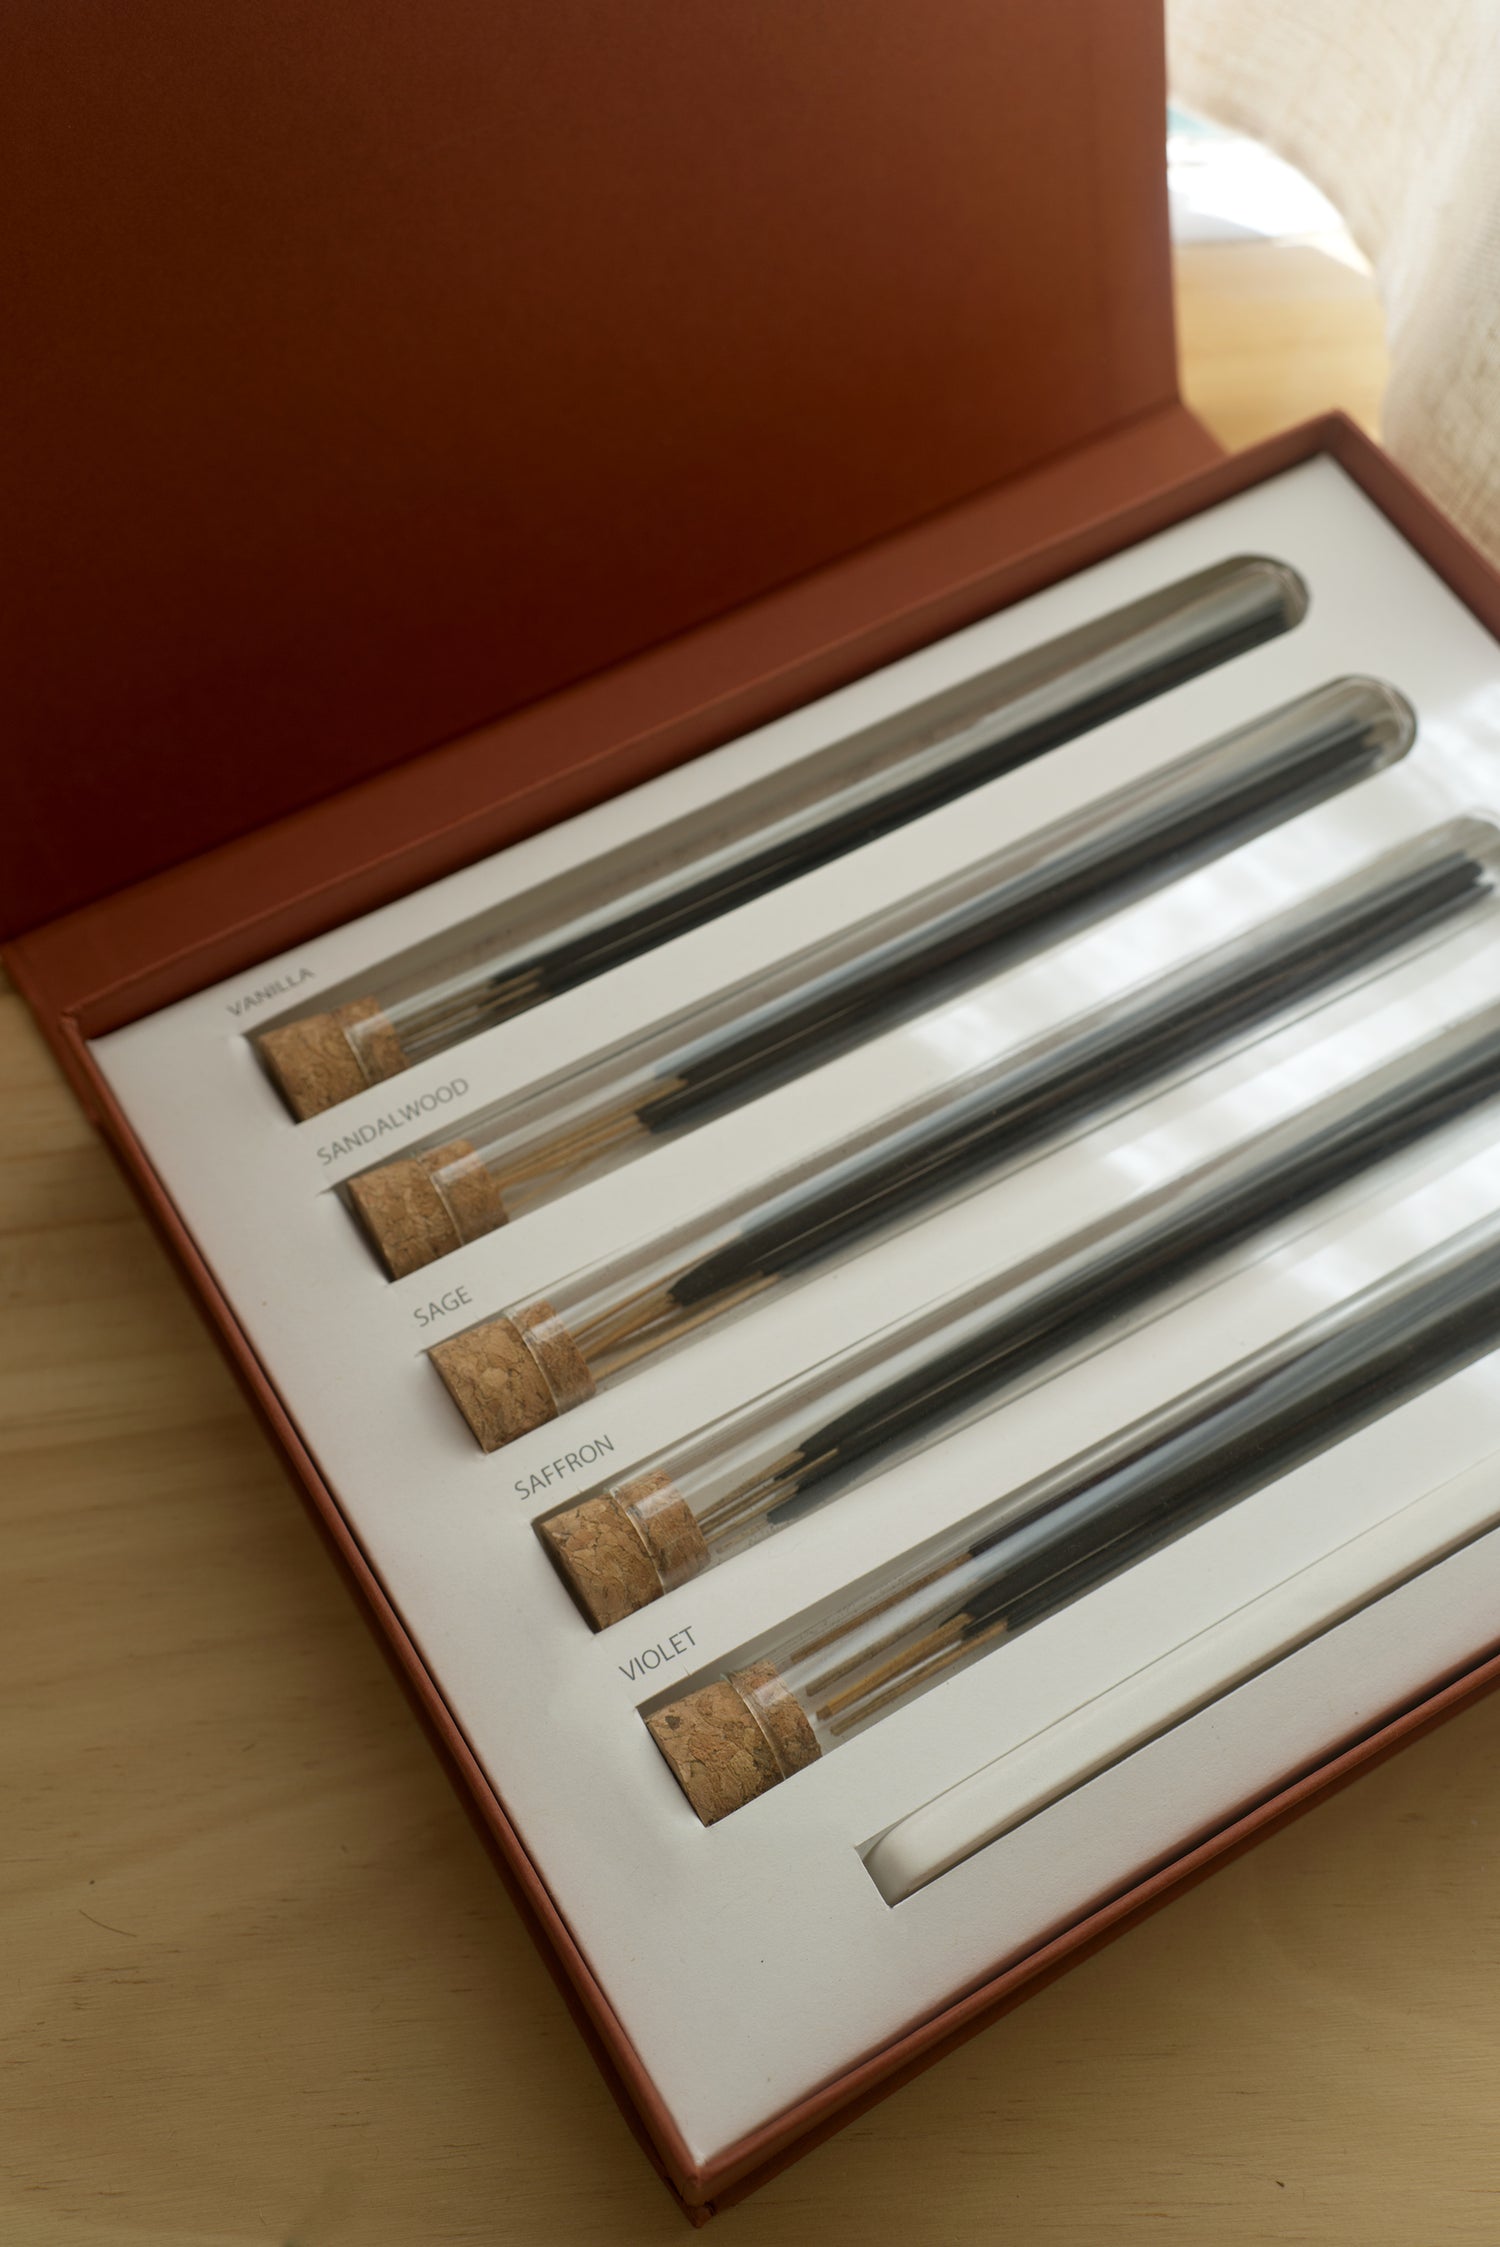 evening rituals box opened with a focus on the glass tubes containing the incense